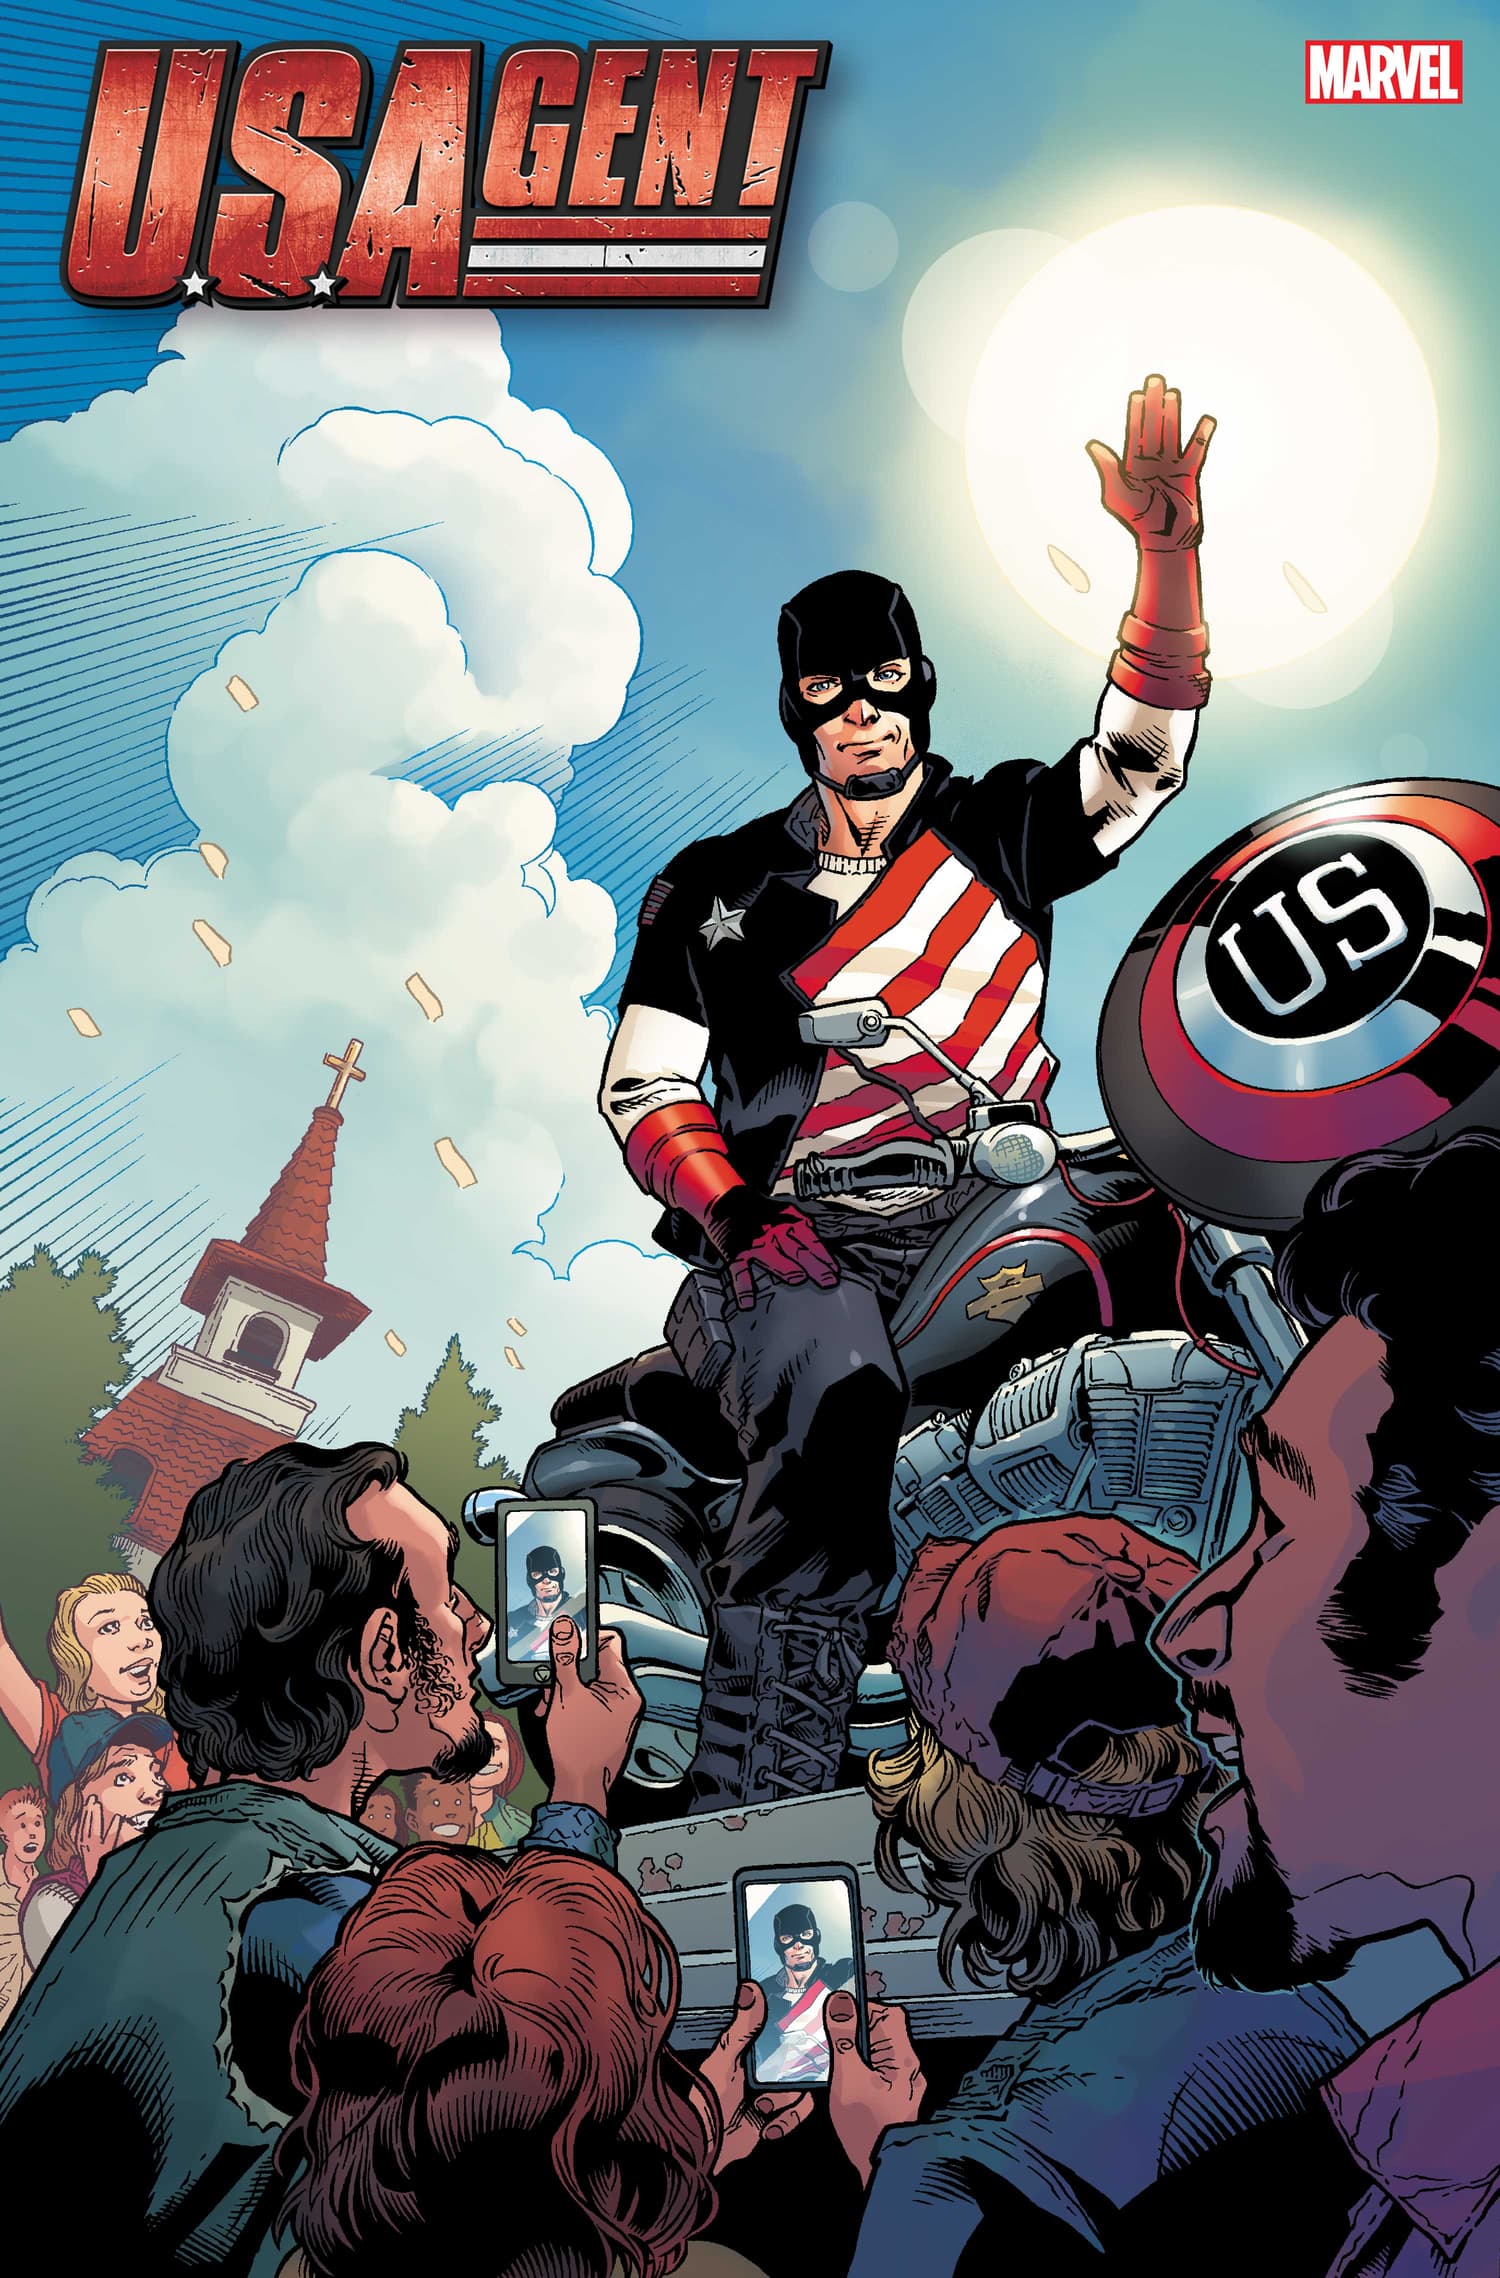 U.S.AGENT #1 art by Georges Jeanty and colors by Matt Milla